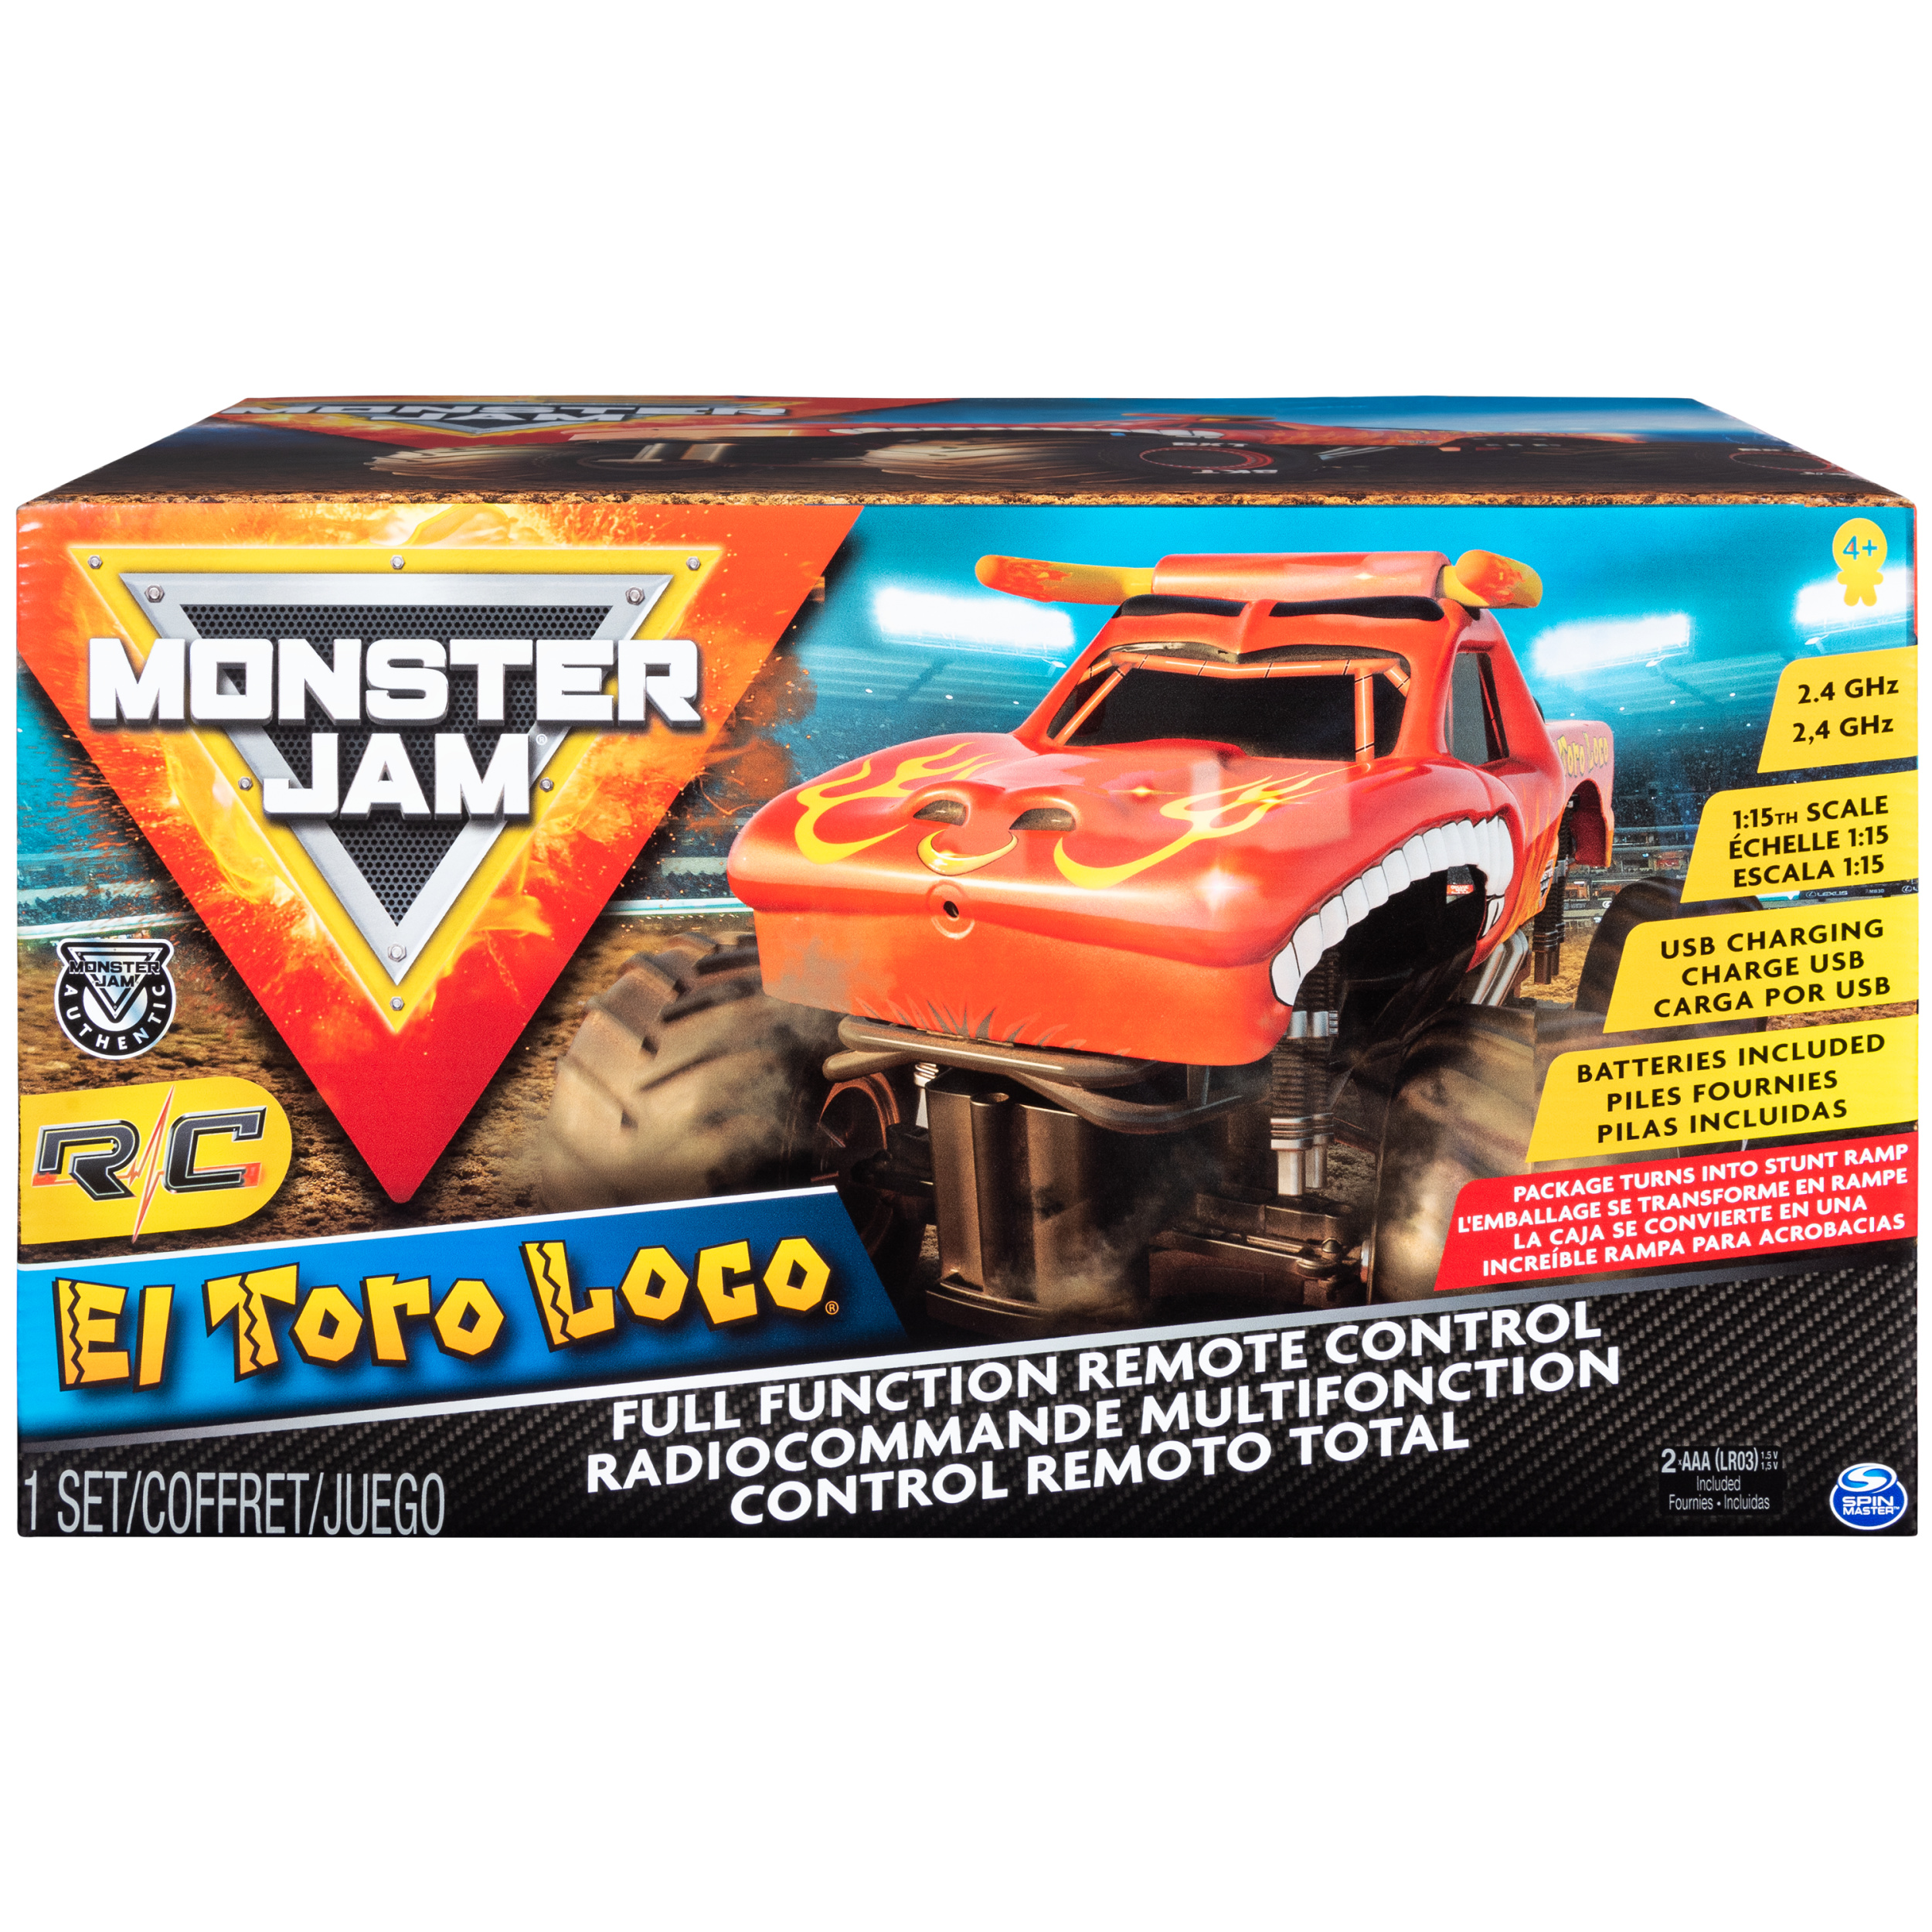 Monster Jam, Official El Toro Loco Remote Control Monster Truck, 1:15 Scale, 2.4 GHz - image 3 of 9